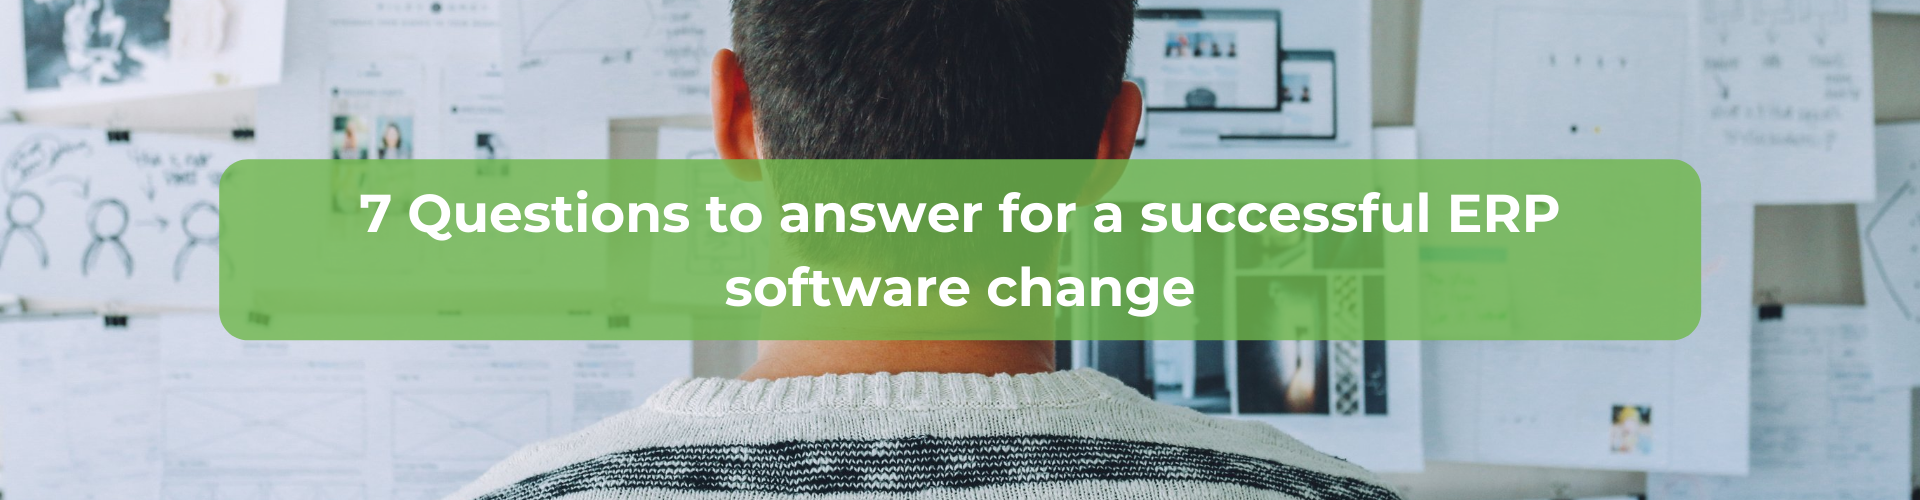 7 questions successful erp change header